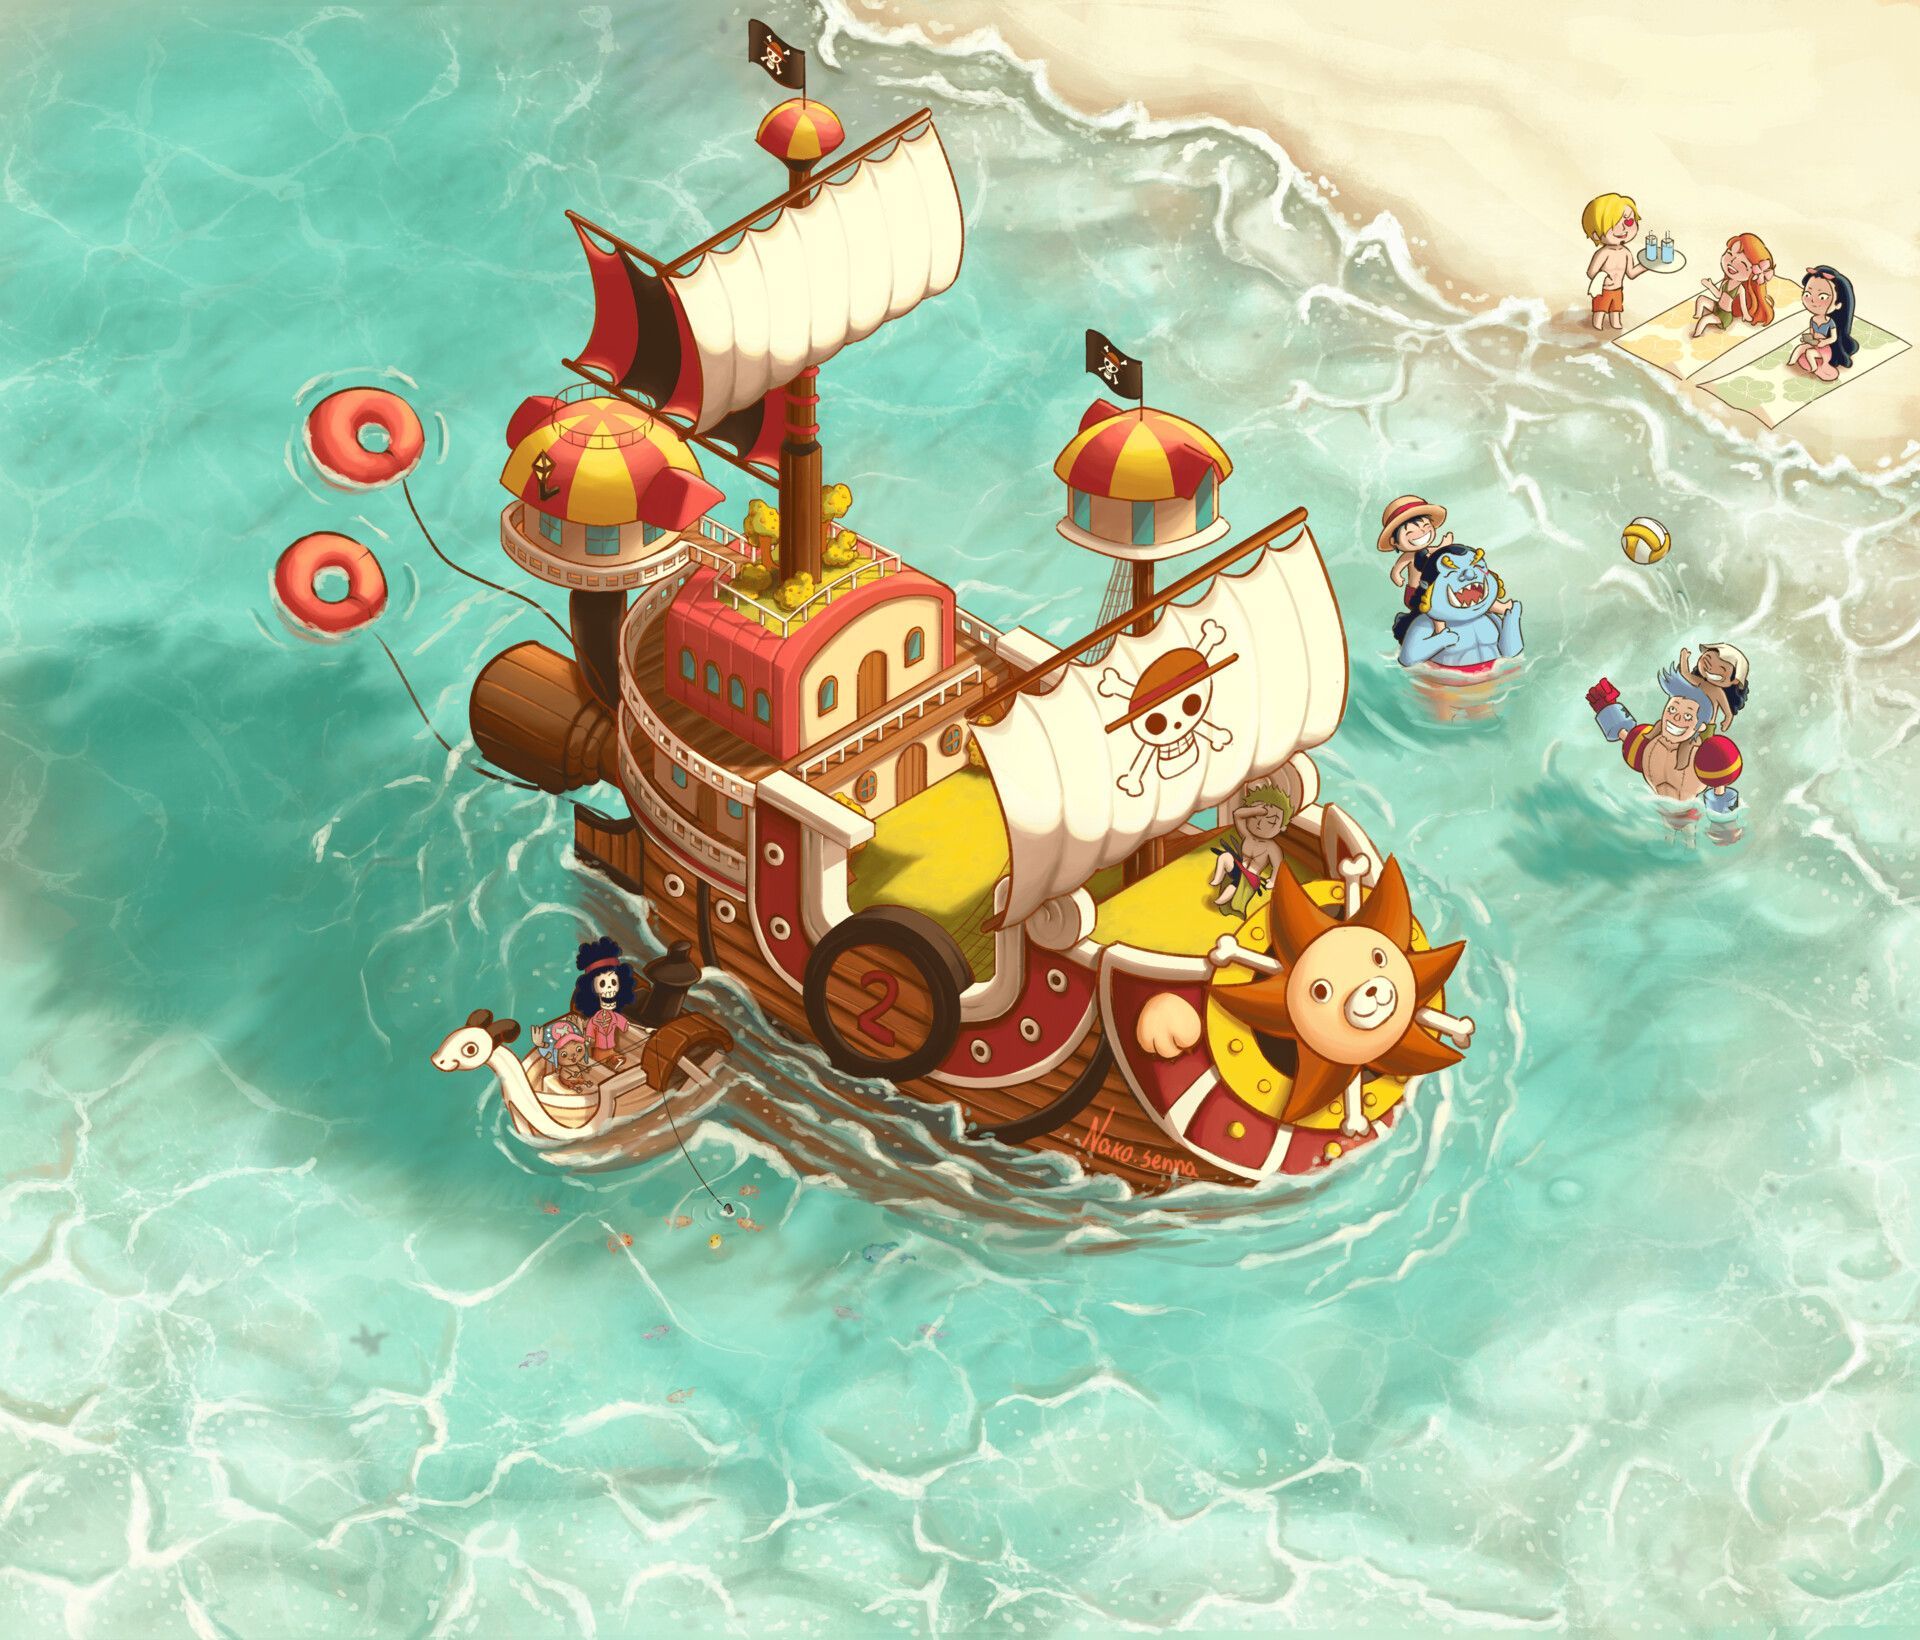 A ship full of people, with a giant yellow pig in the front, sails through the ocean. - One Piece